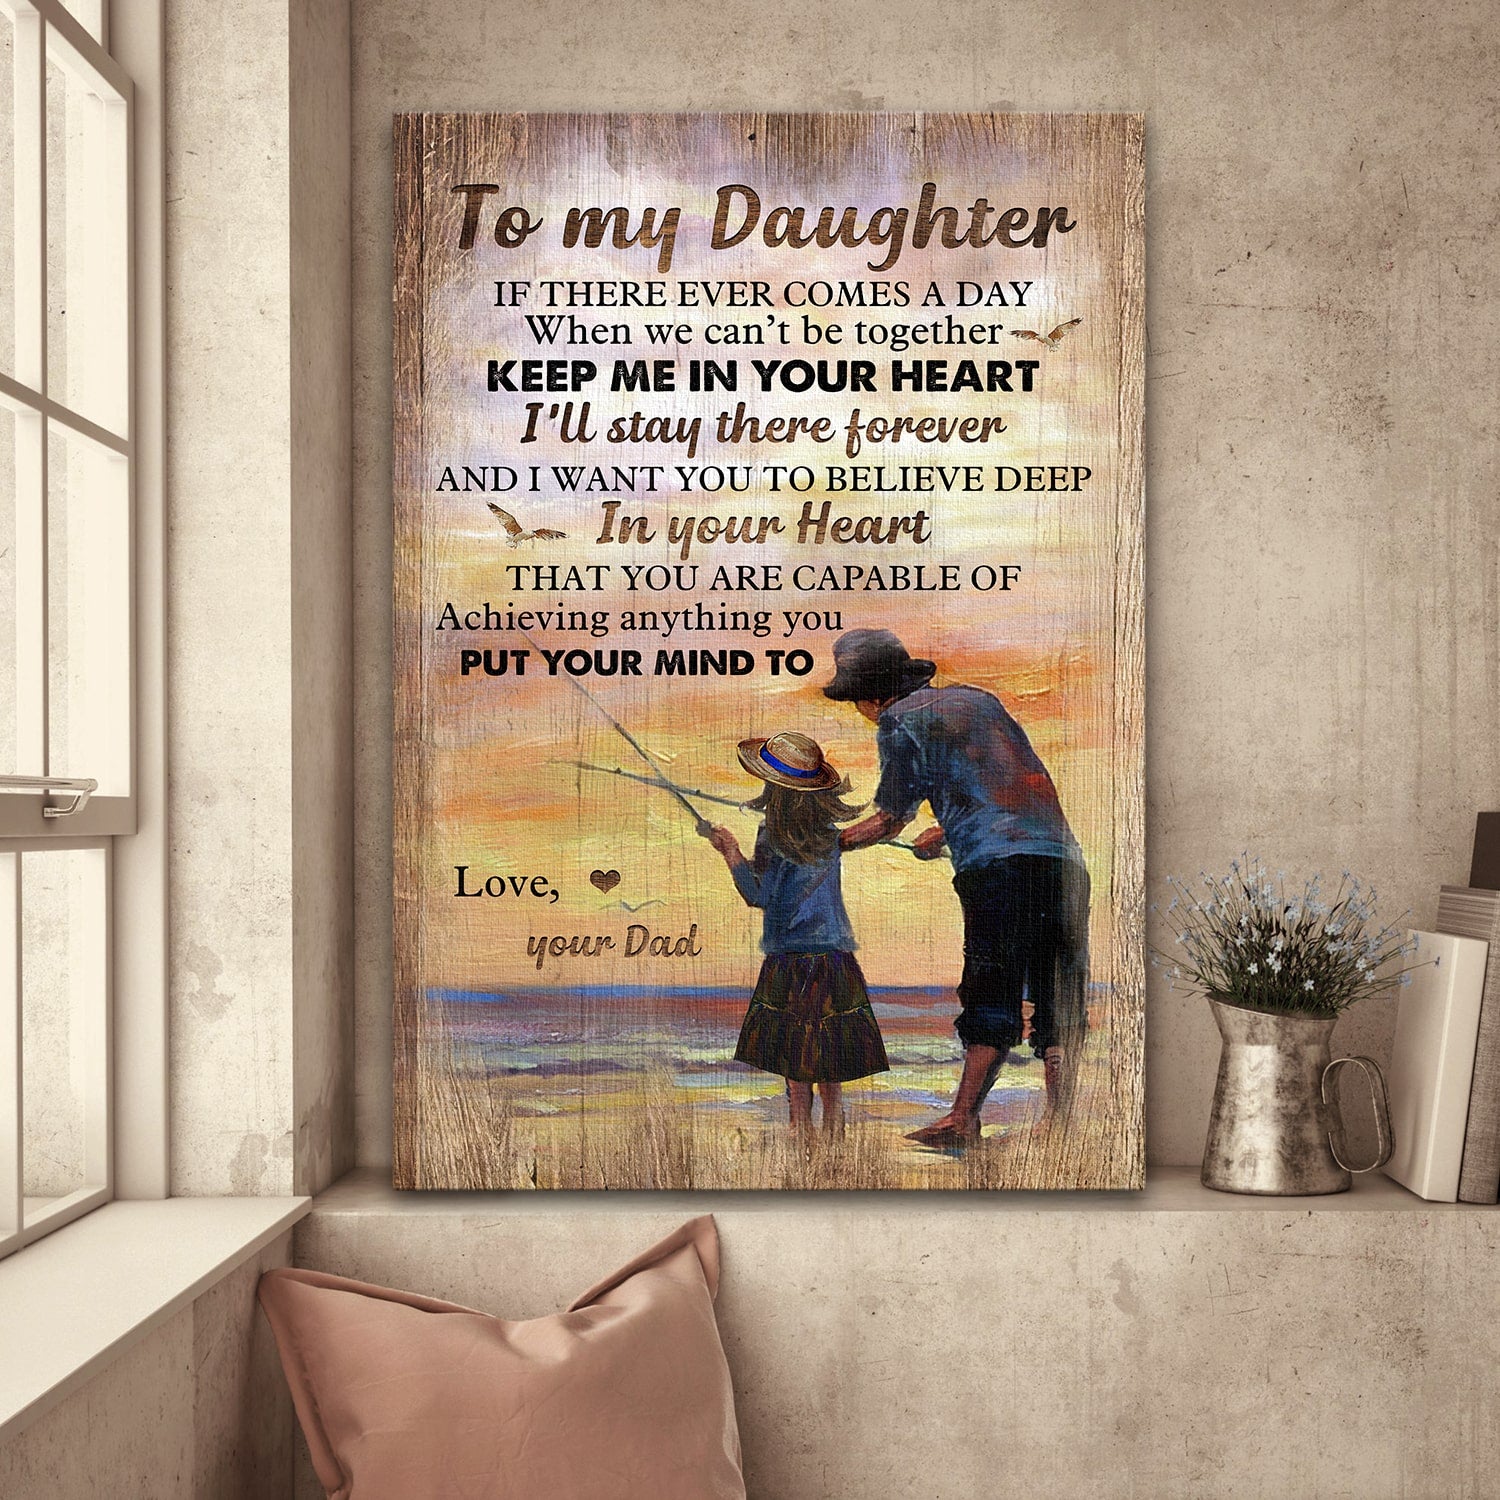 Dad to daughter, Fishing, Beach, You are capable of achieving anything - Family Portrait Canvas Prints, Wall Art